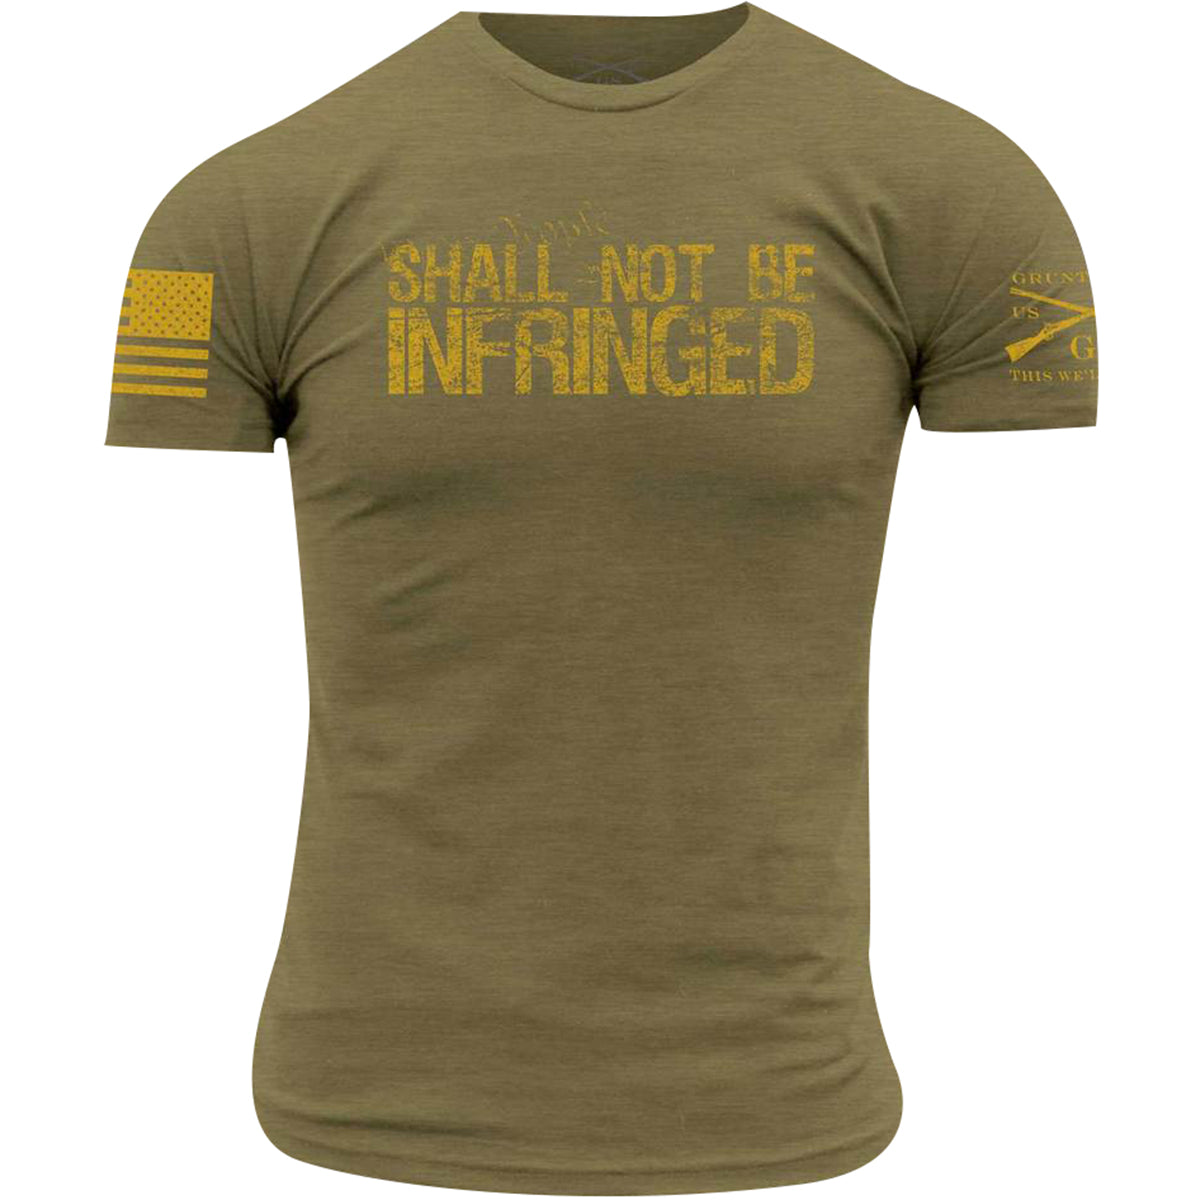 Grunt Style Shall Not Be Infringed T-Shirt - Olive Green Grunt Style